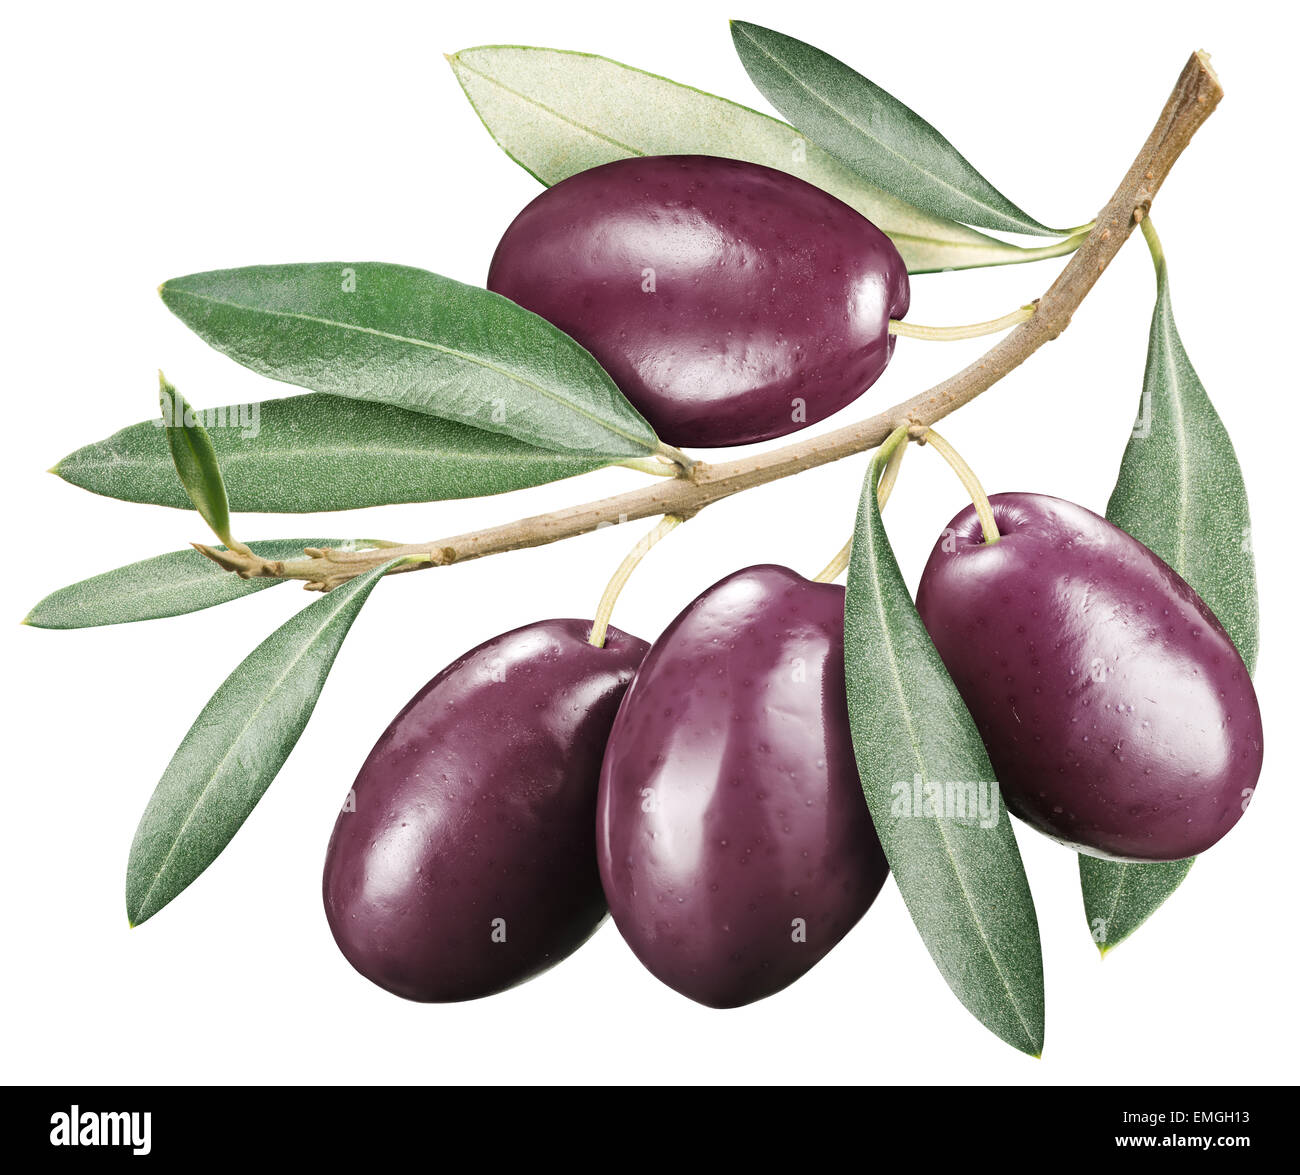 Kalamata olives with leaves on a white background. File contains clipping paths. Stock Photo